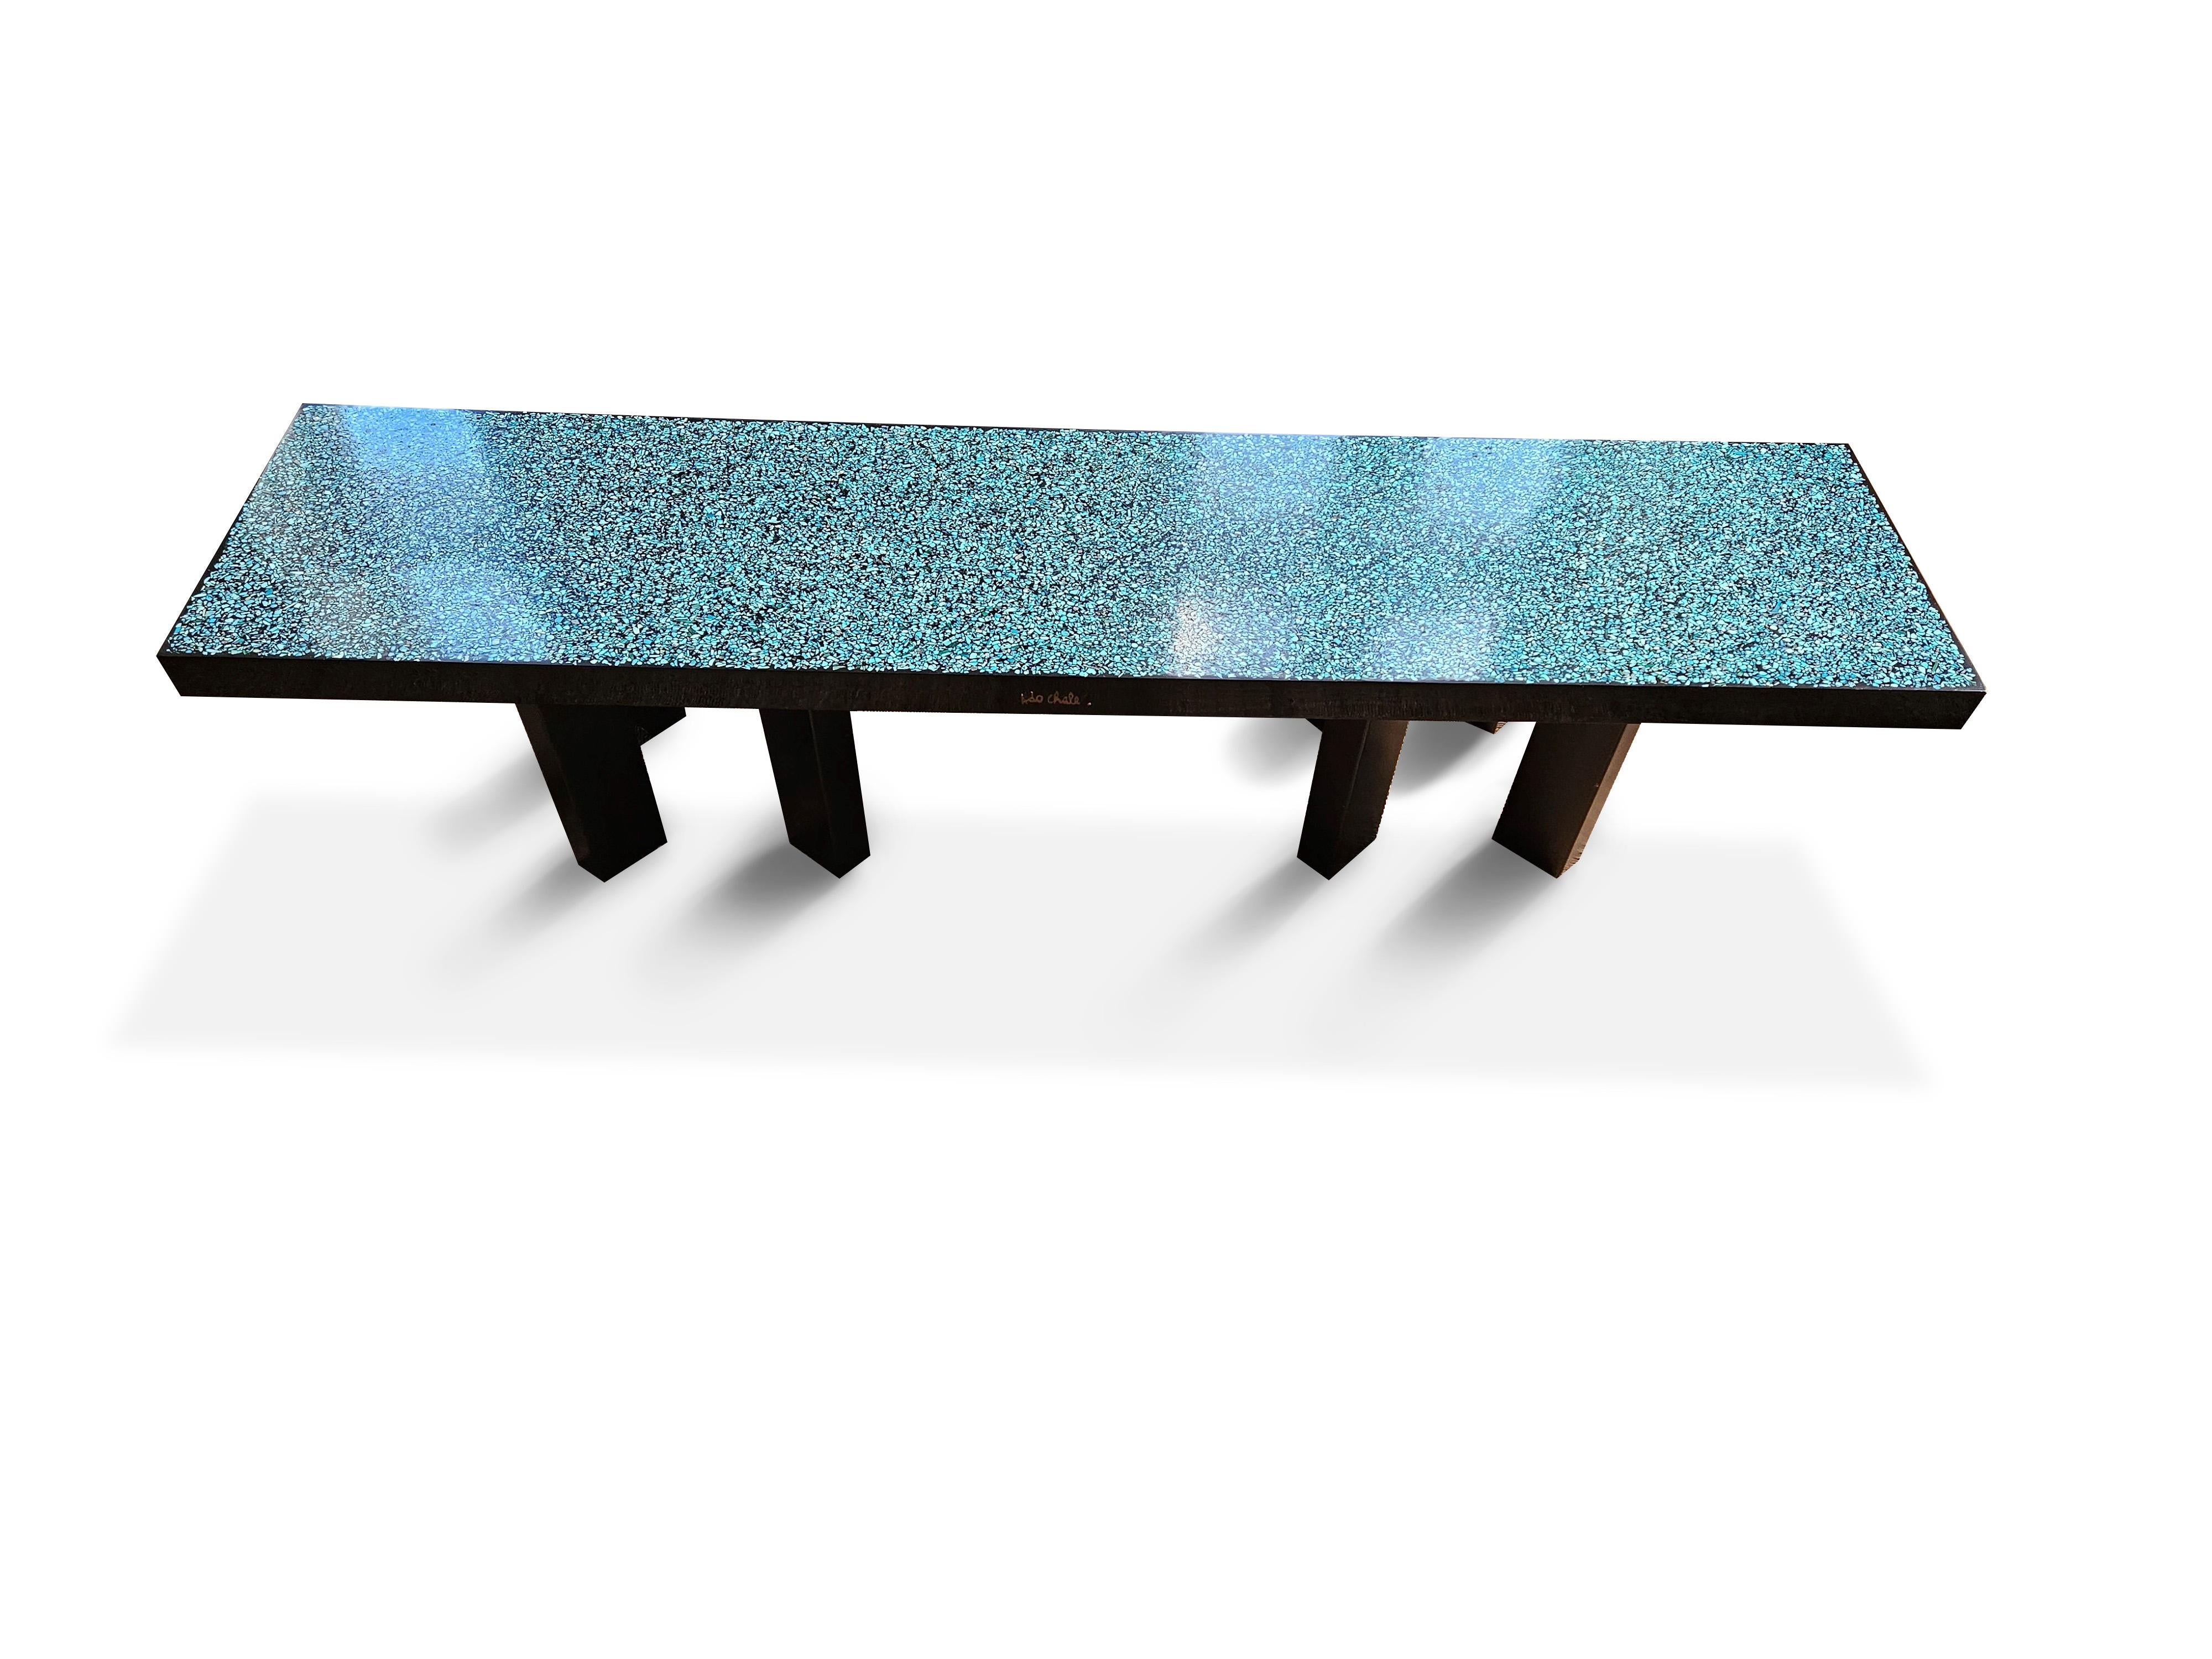 A turquoise mosaic coffee table designed and produced by Ado Chale, Brussels, Belgium, 1980s.
Wooden feets.